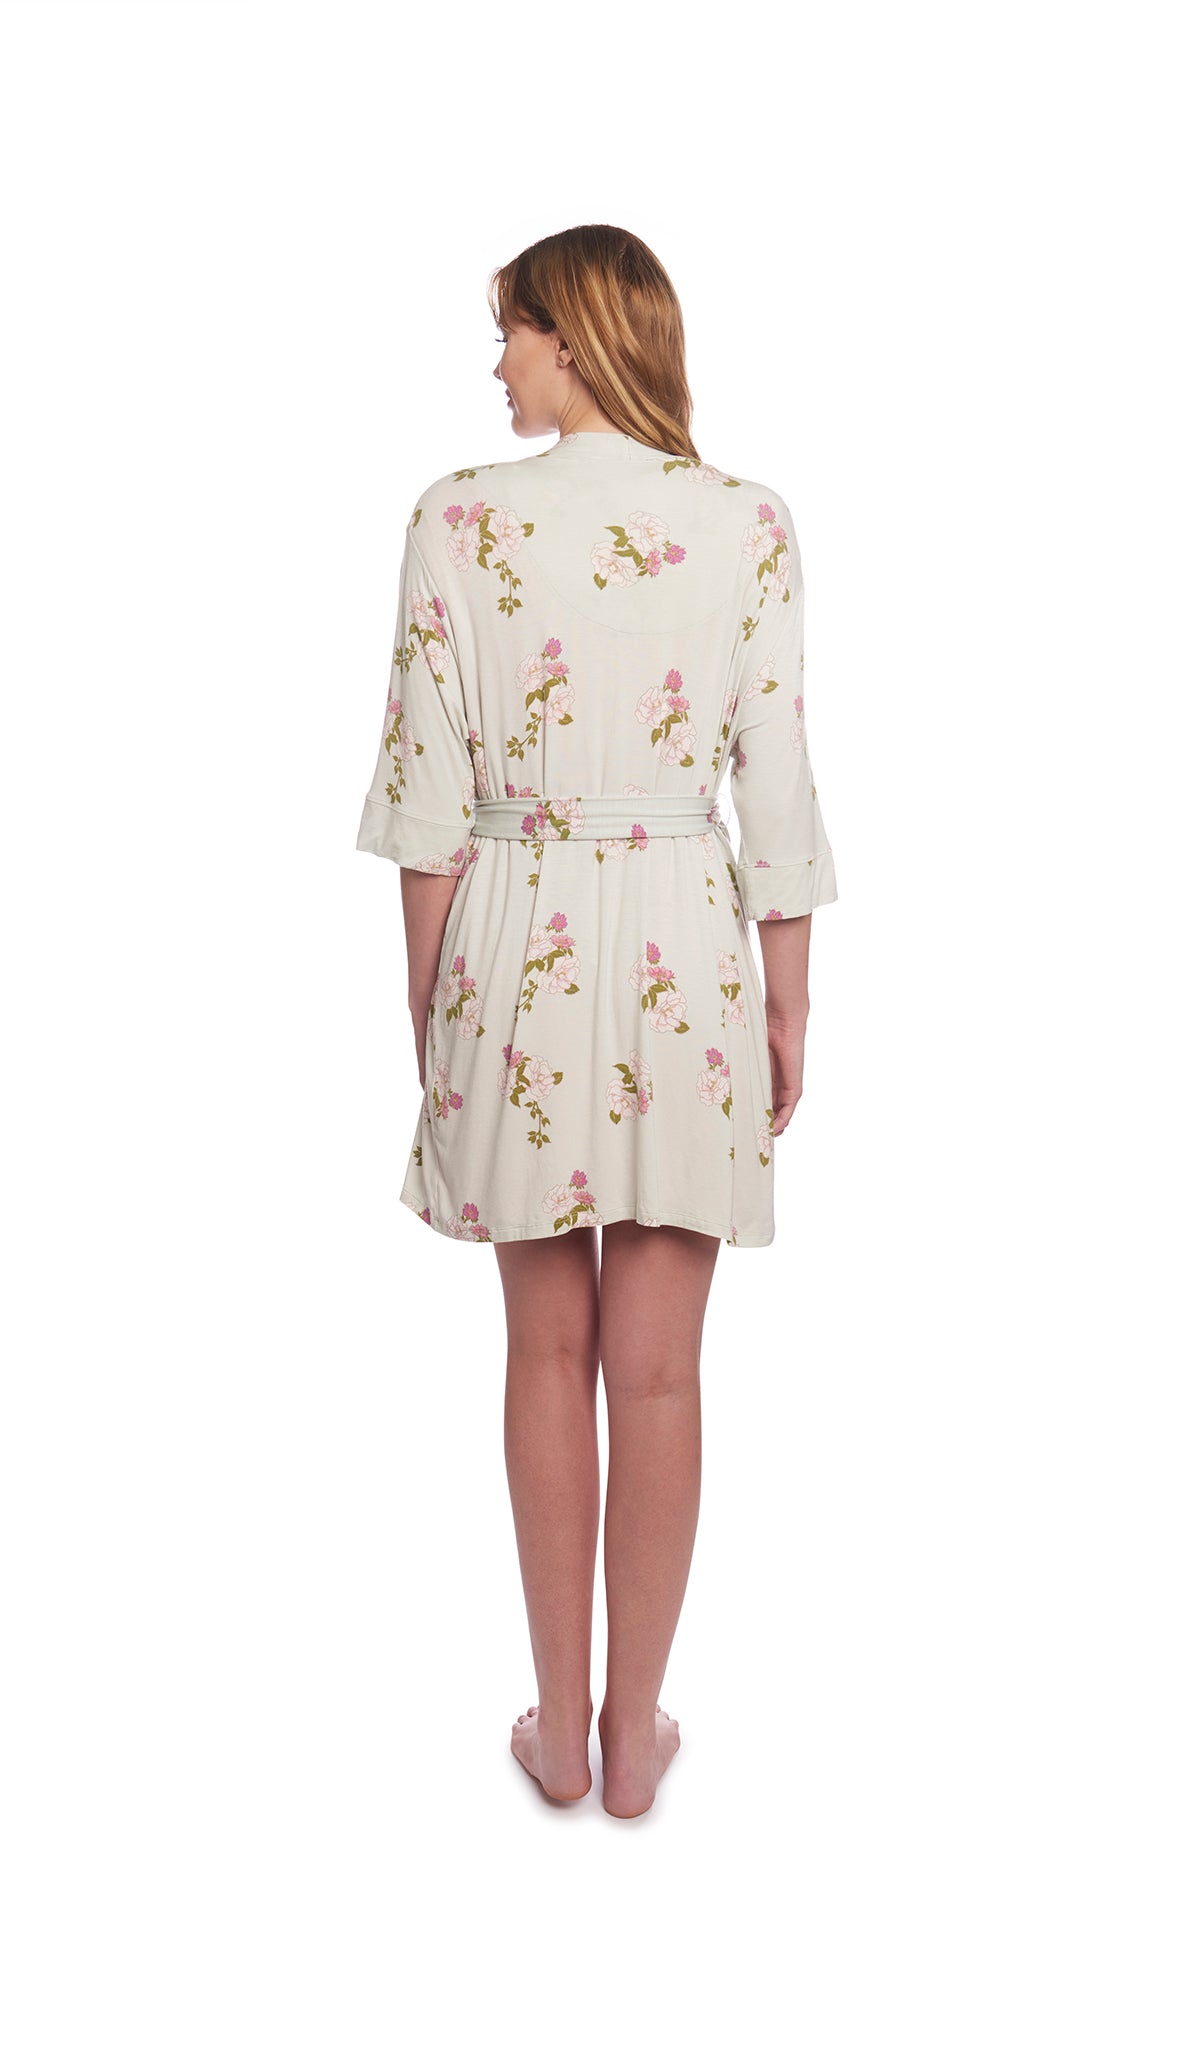 Peony Carolyn 2-Piece Set, back shot of woman wearing the floral printed robe.